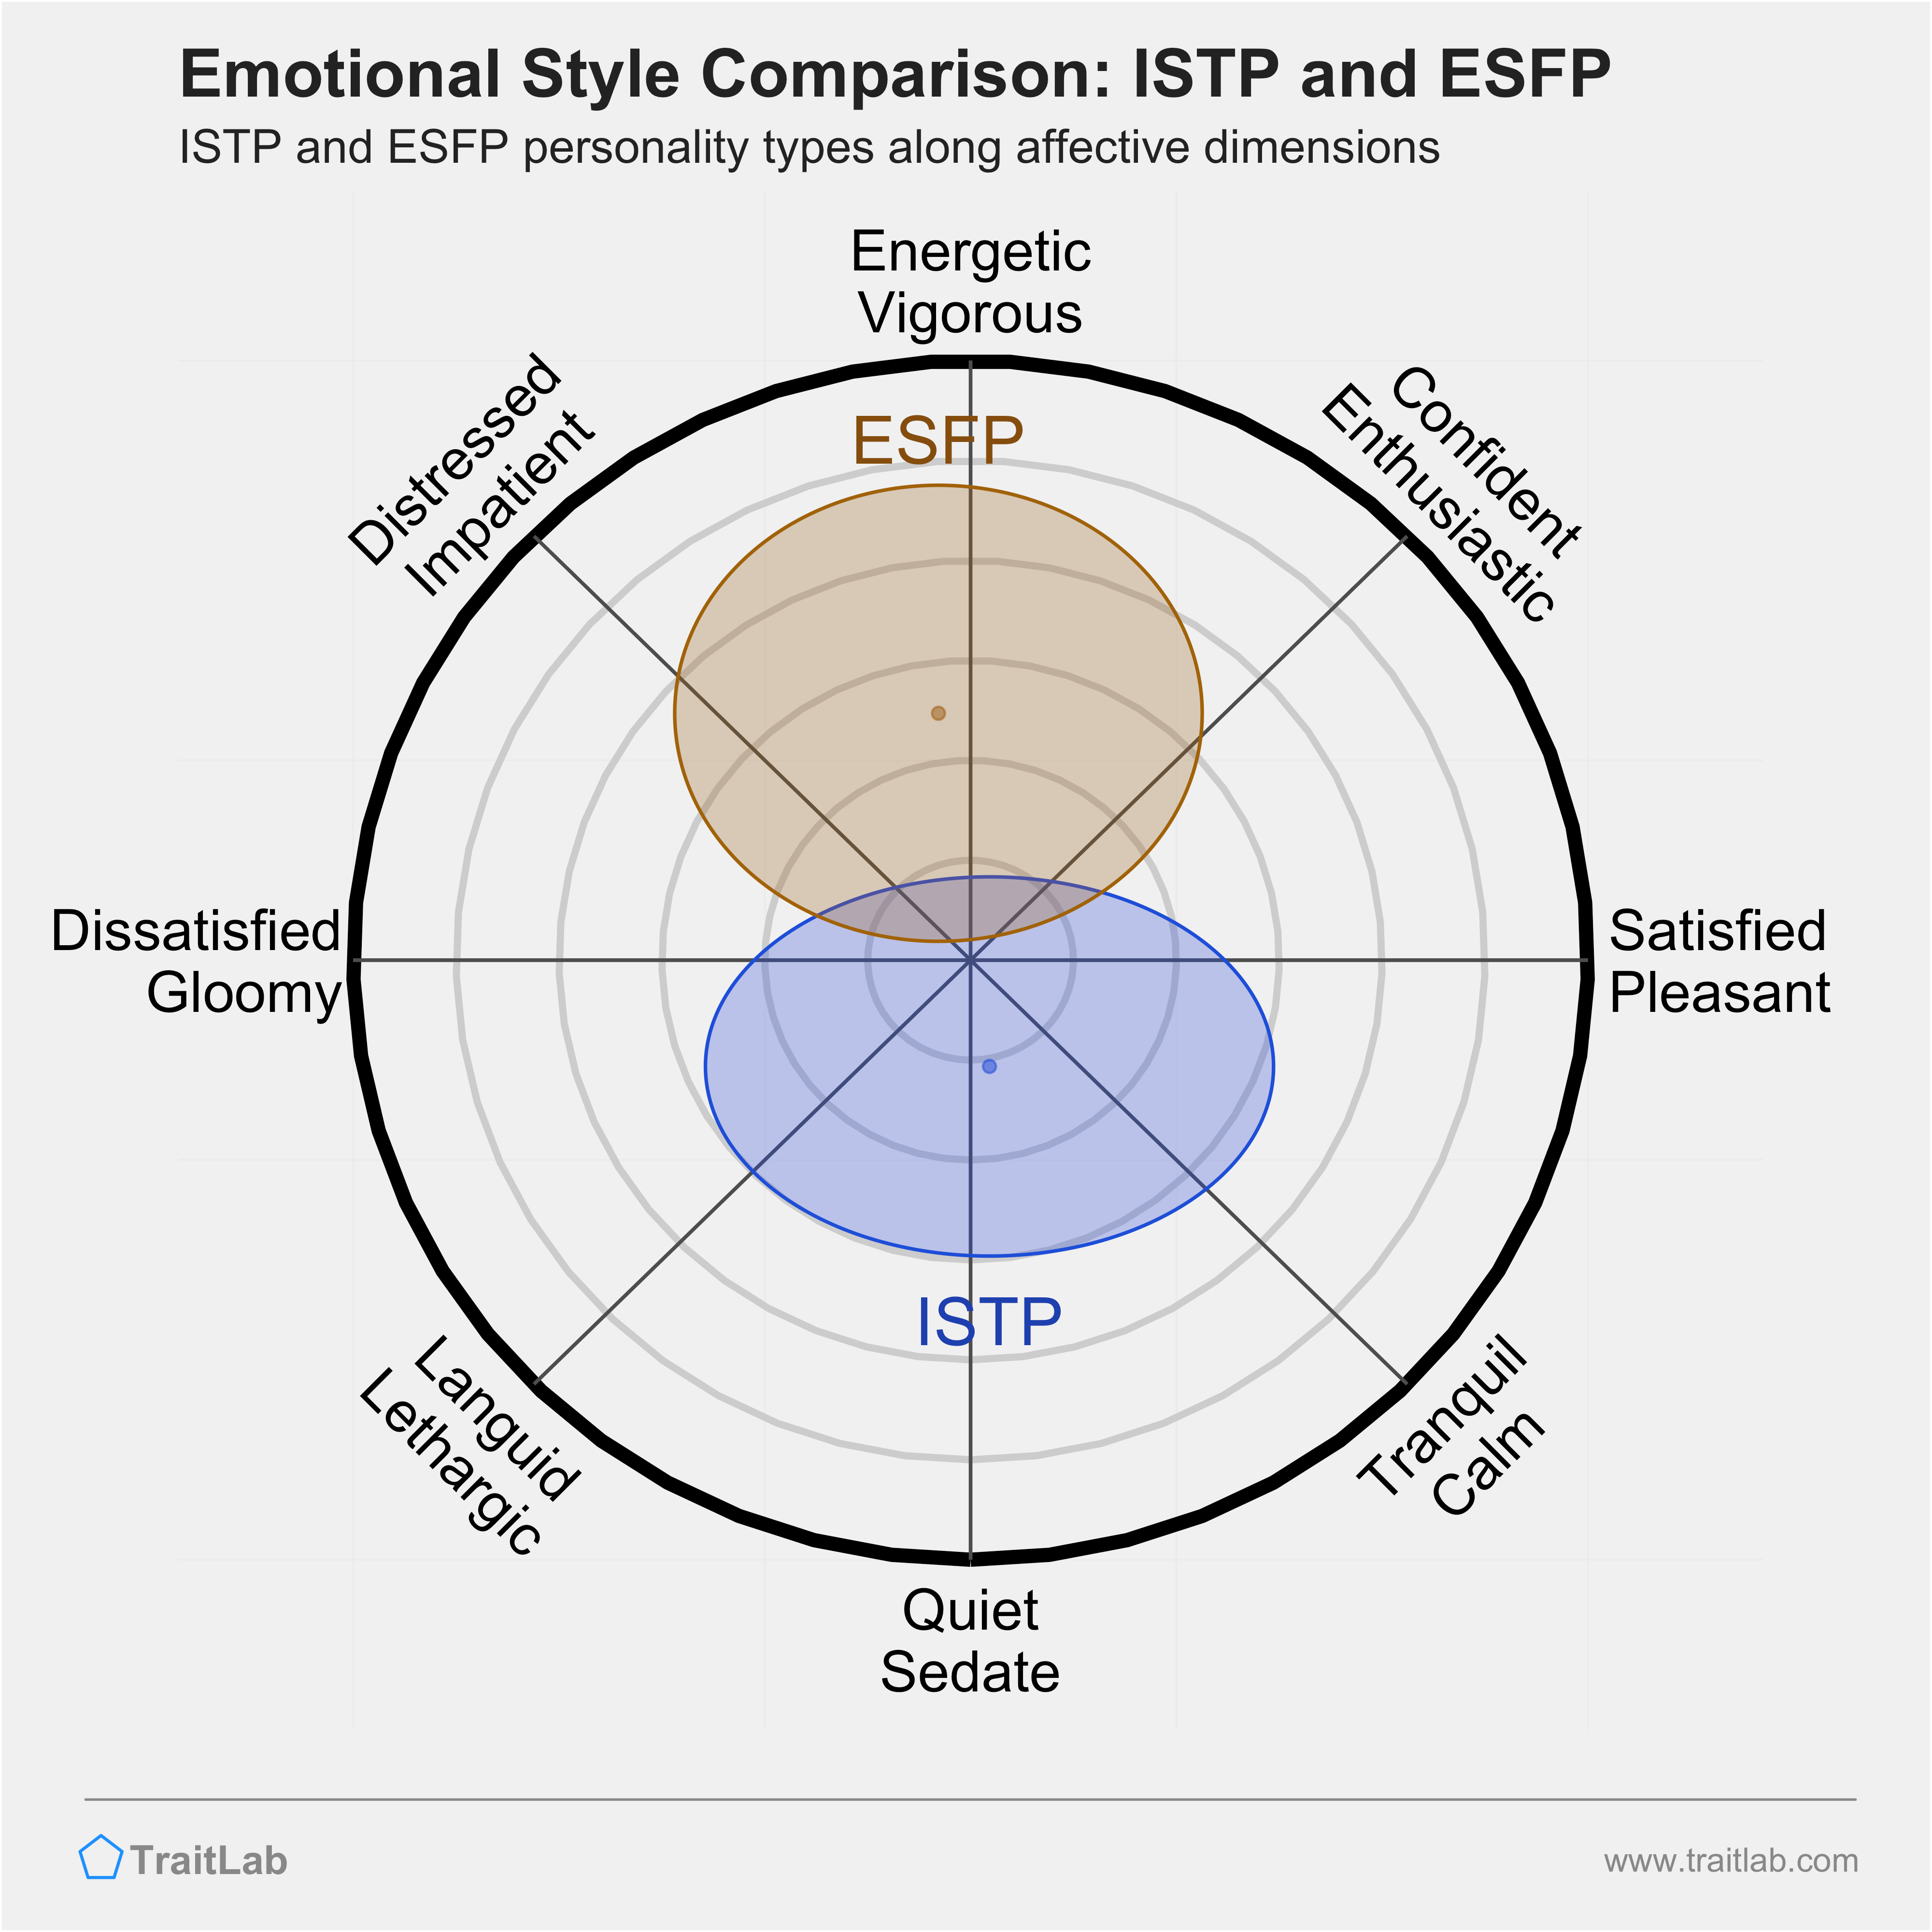 ISTP and ESFP comparison across emotional (affective) dimensions